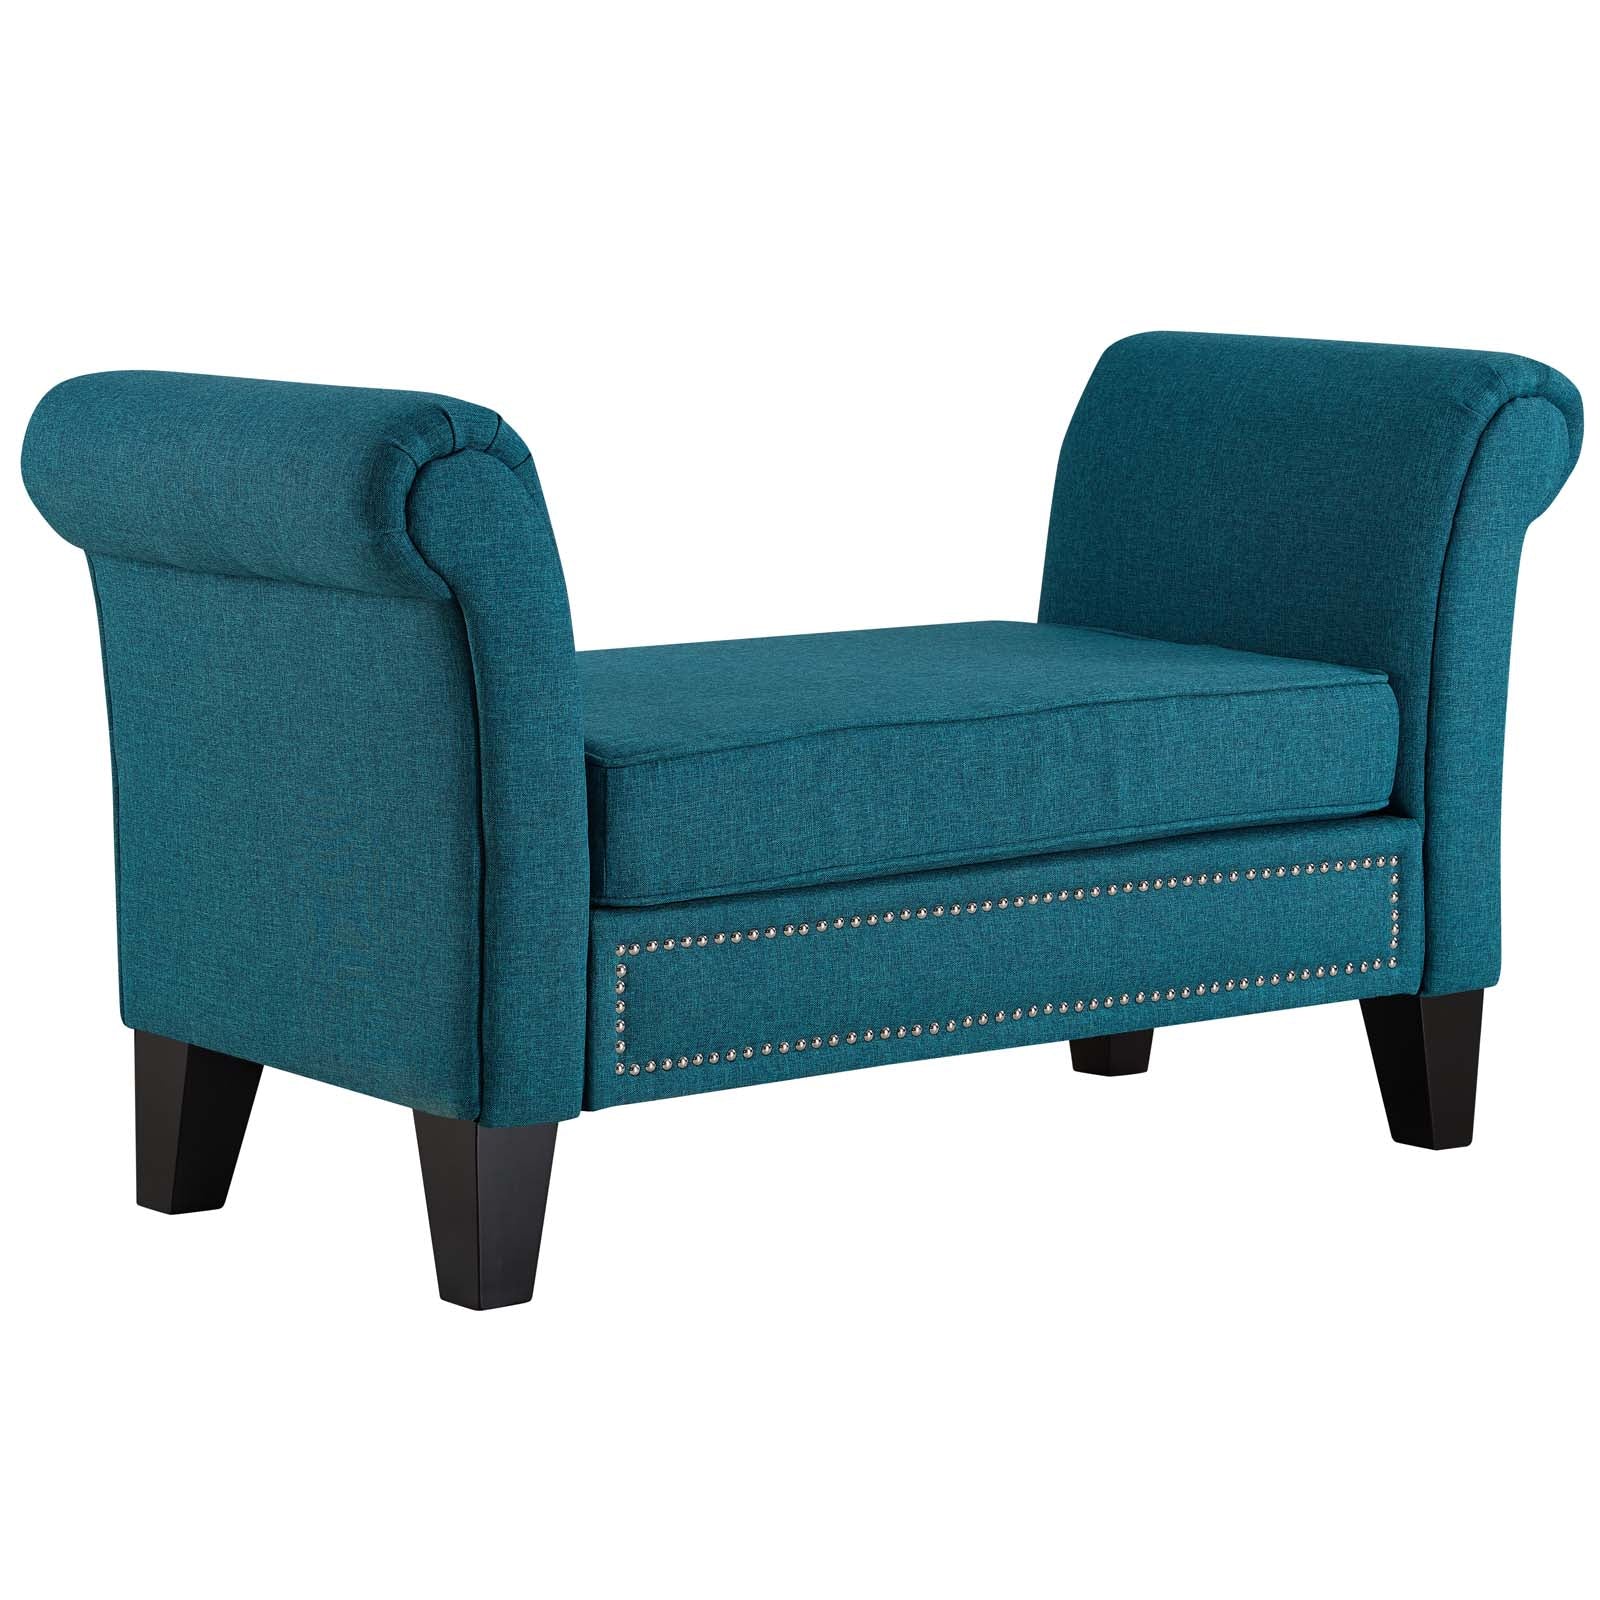 Rendezvous Bench Teal